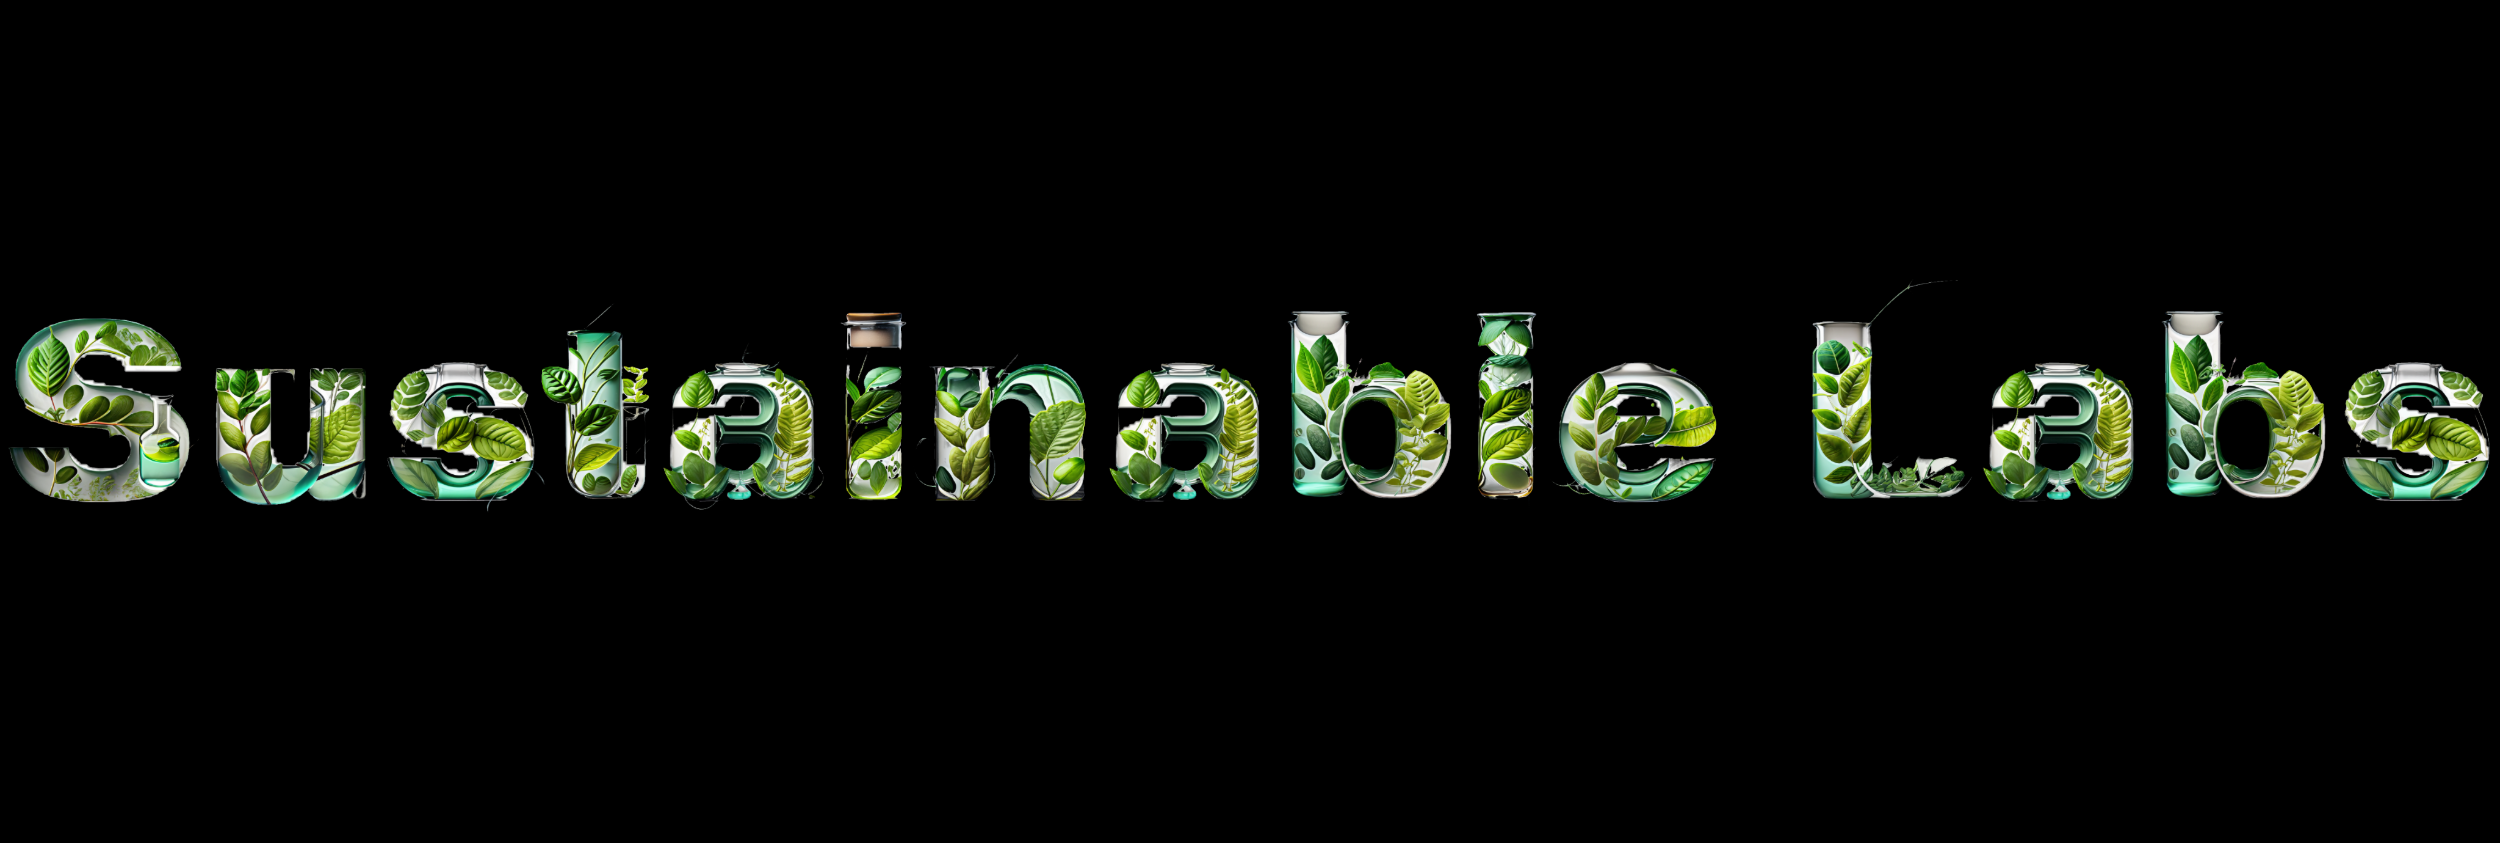 Sustainable Labs